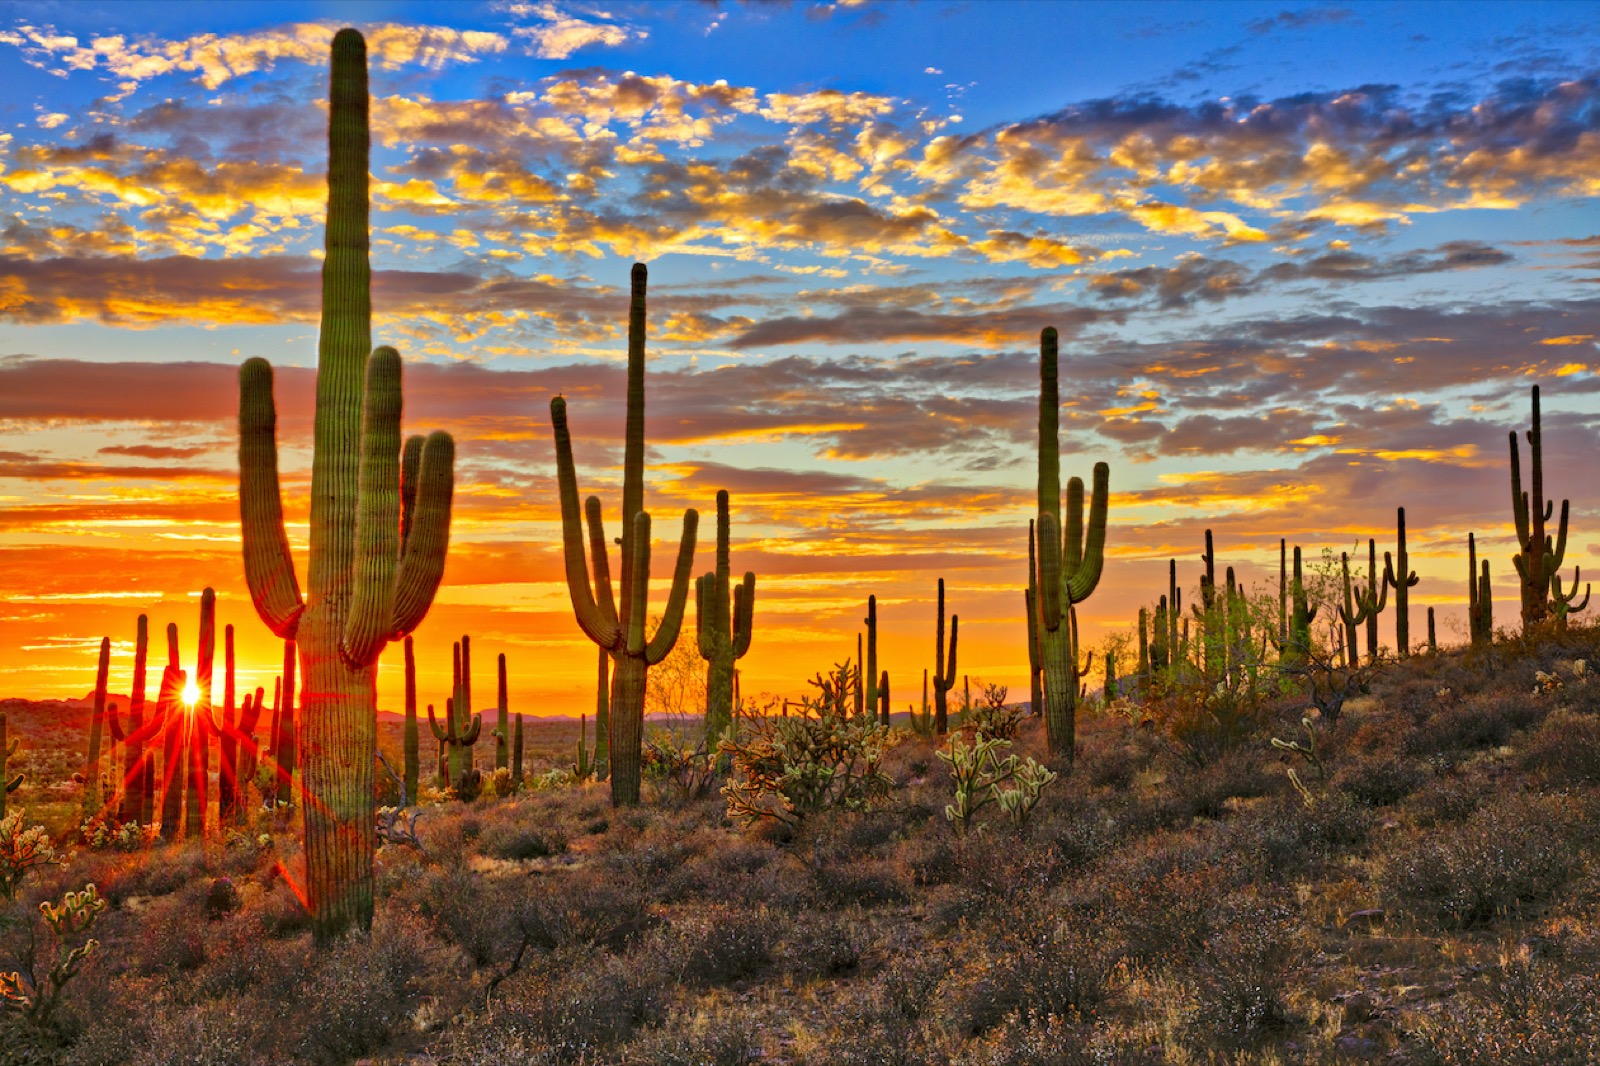 Can You Match These Natural Wonders to Their Locations? Sonoran Desert